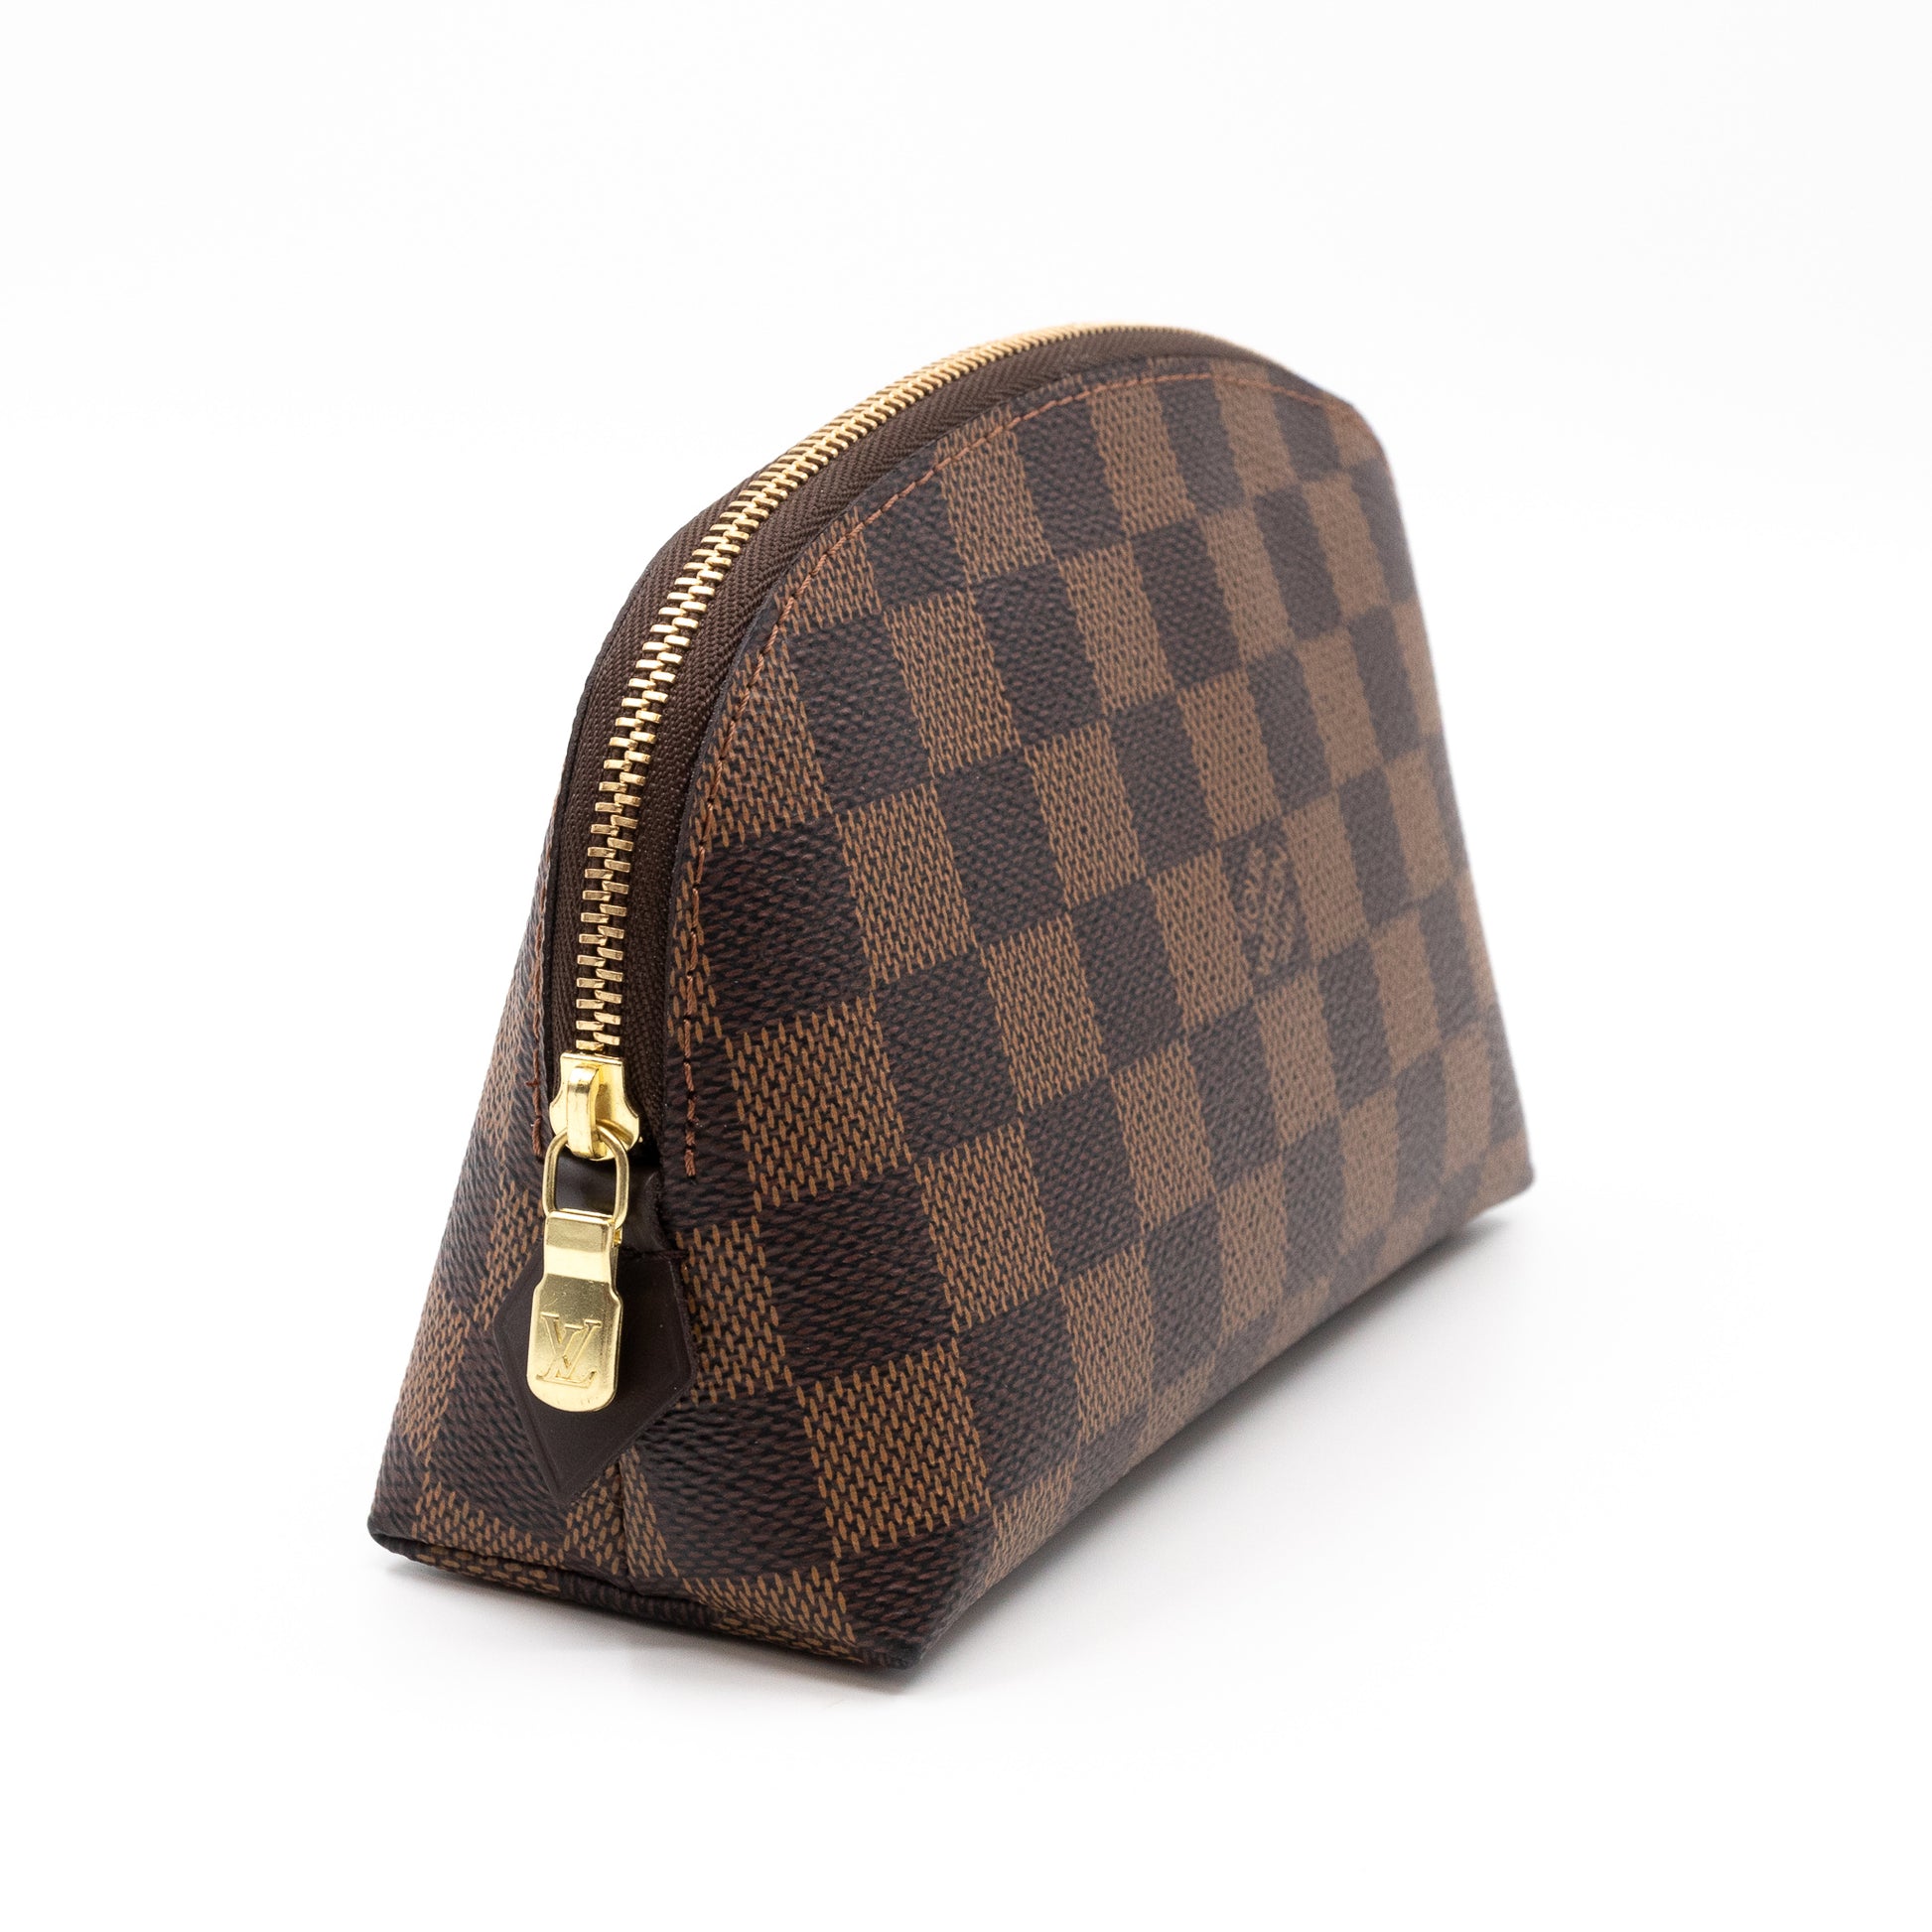 Lv Cosmetic Pouch Gm Damier Ebene